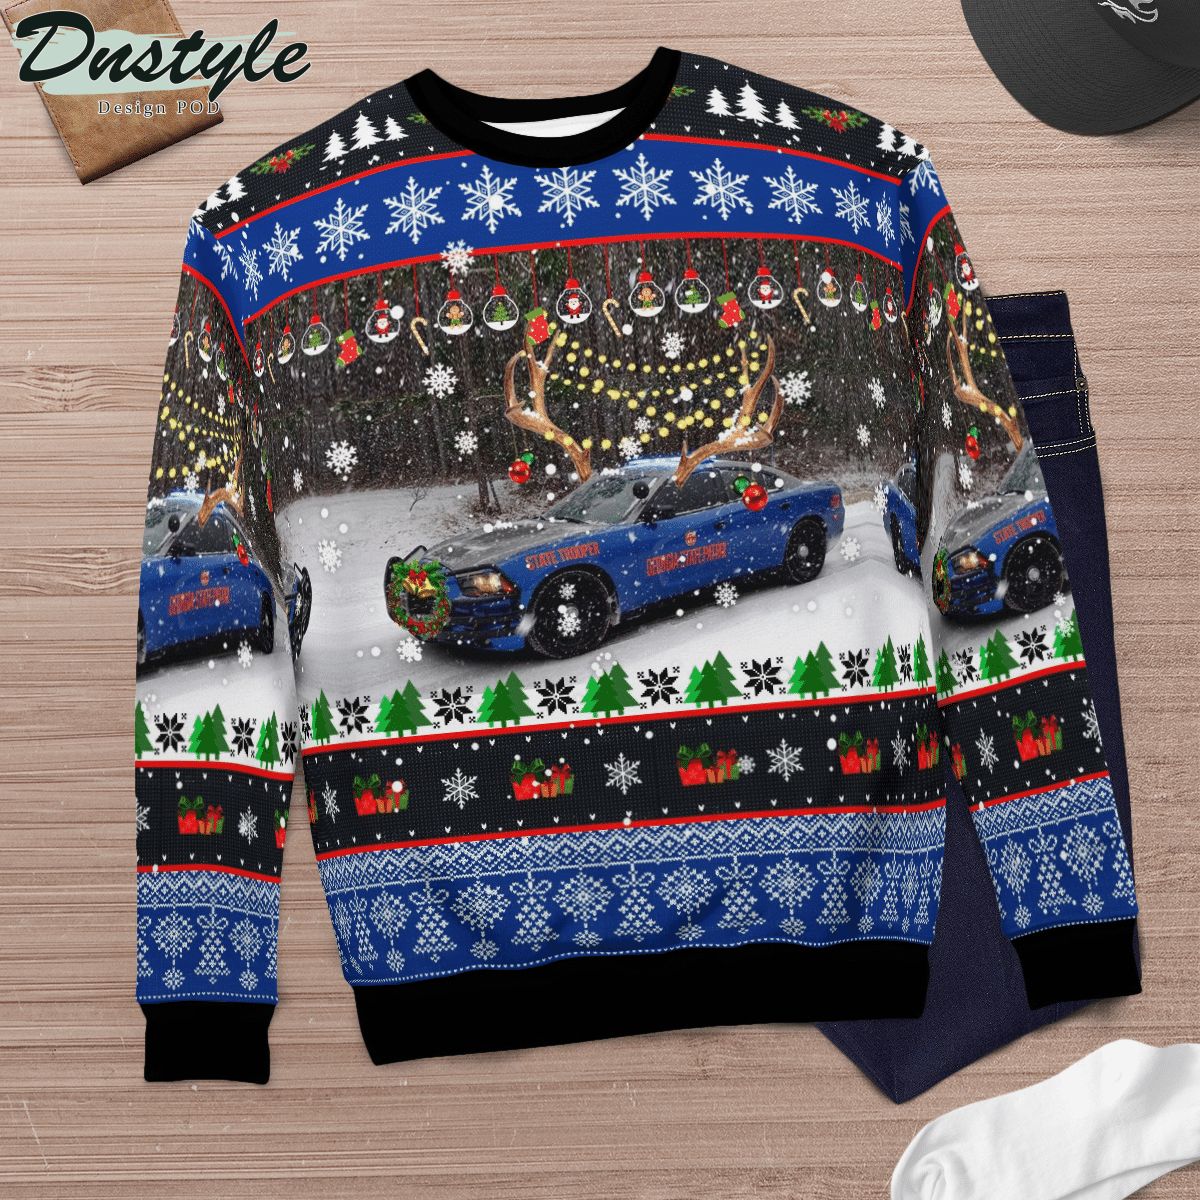 Georgia State Patrol Blue Charger Pursuit Ugly Christmas Sweater